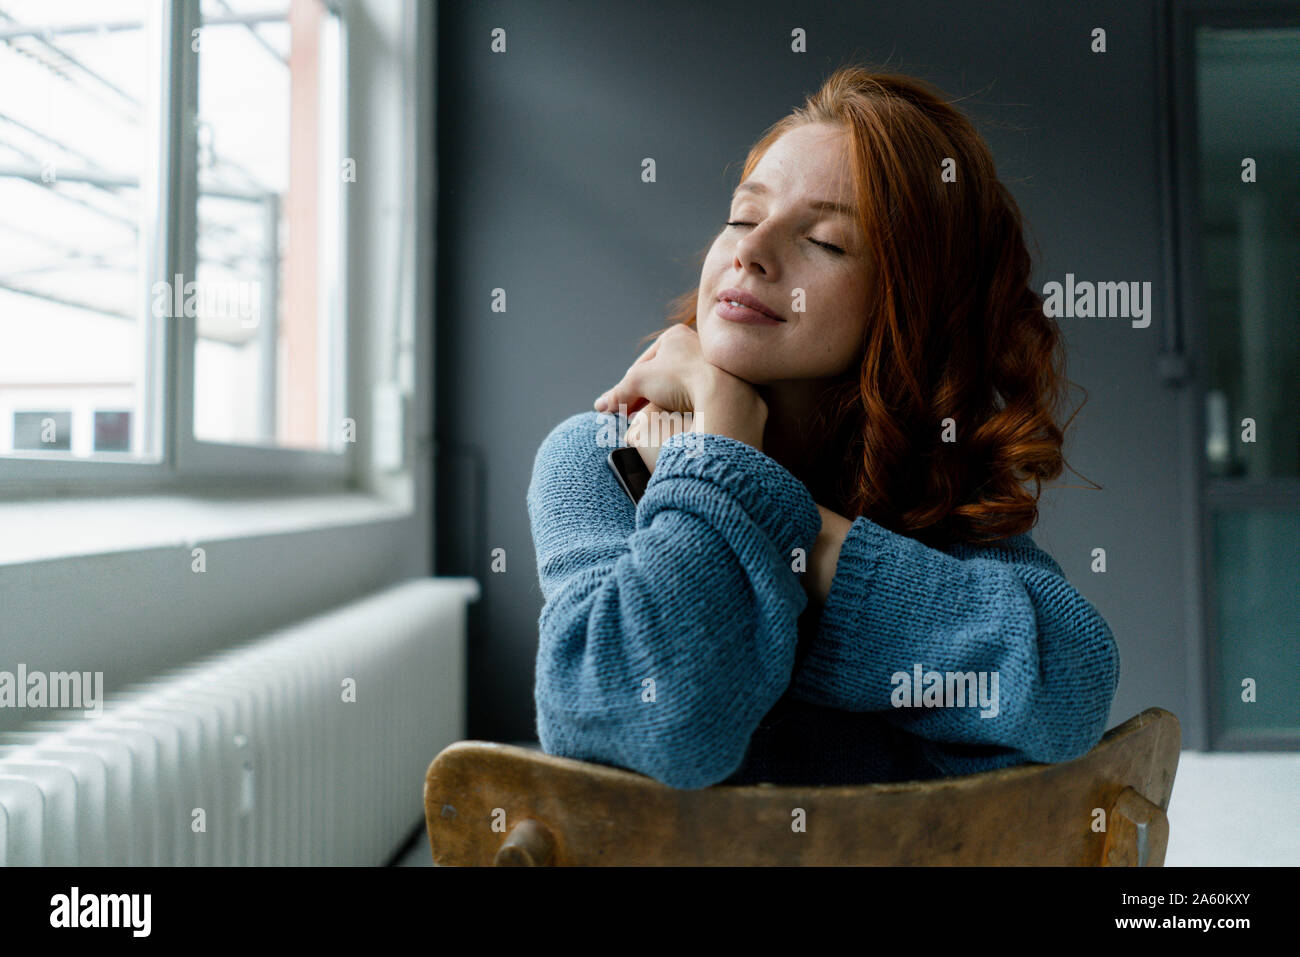 Portrait of redheaded woman with digital tablet relaxing in a loft Stock Photo